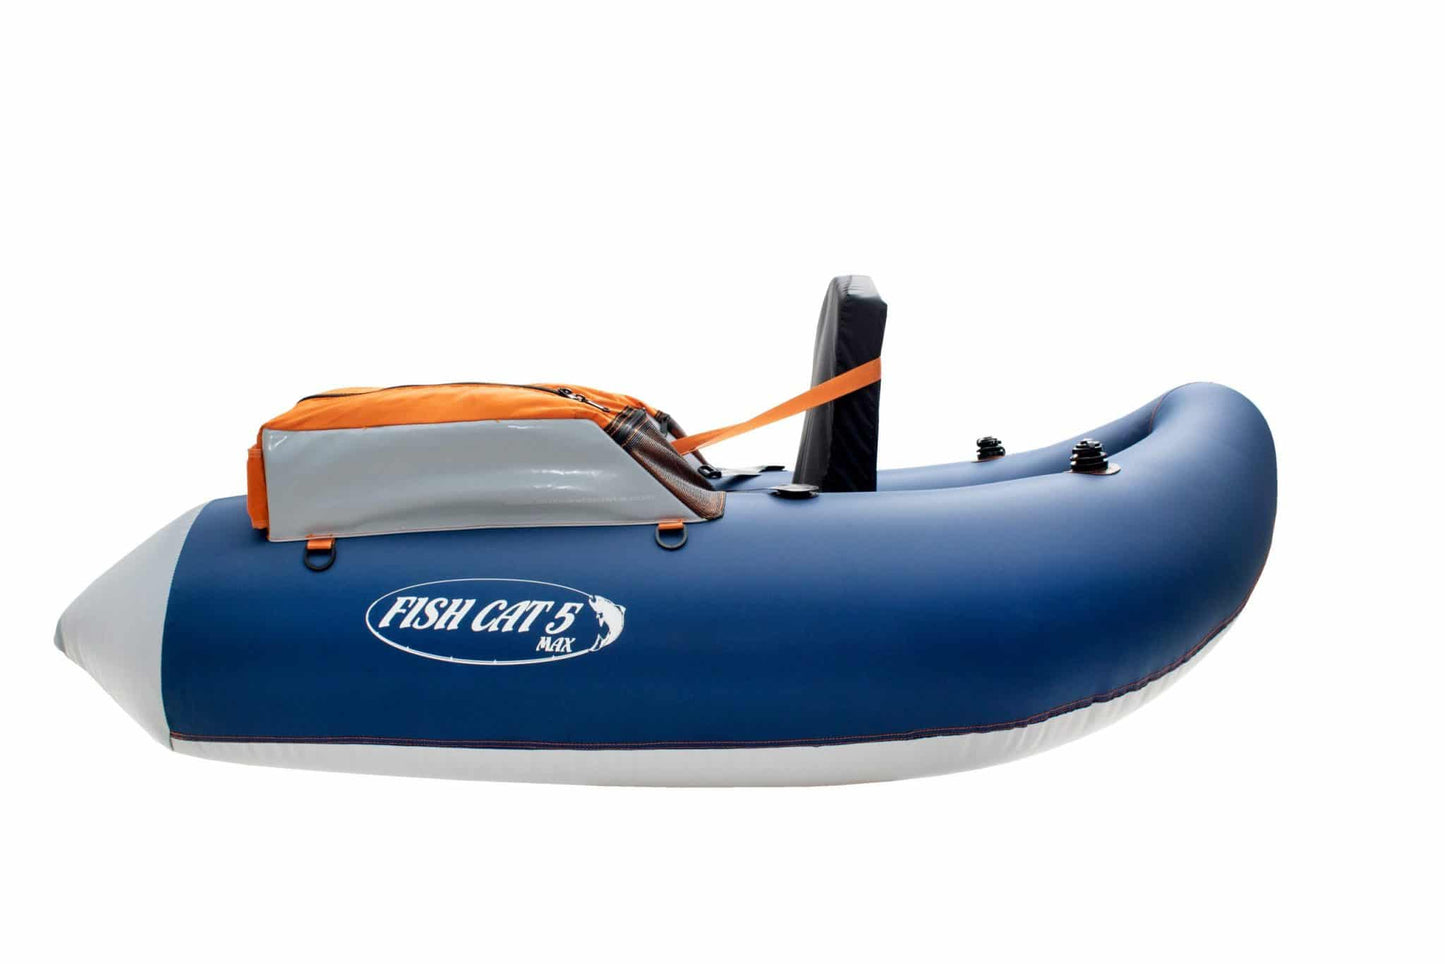 Outcast Fish Cat 5 Max Kick Boat ( NOT INCLUDED FREE SHPPING)